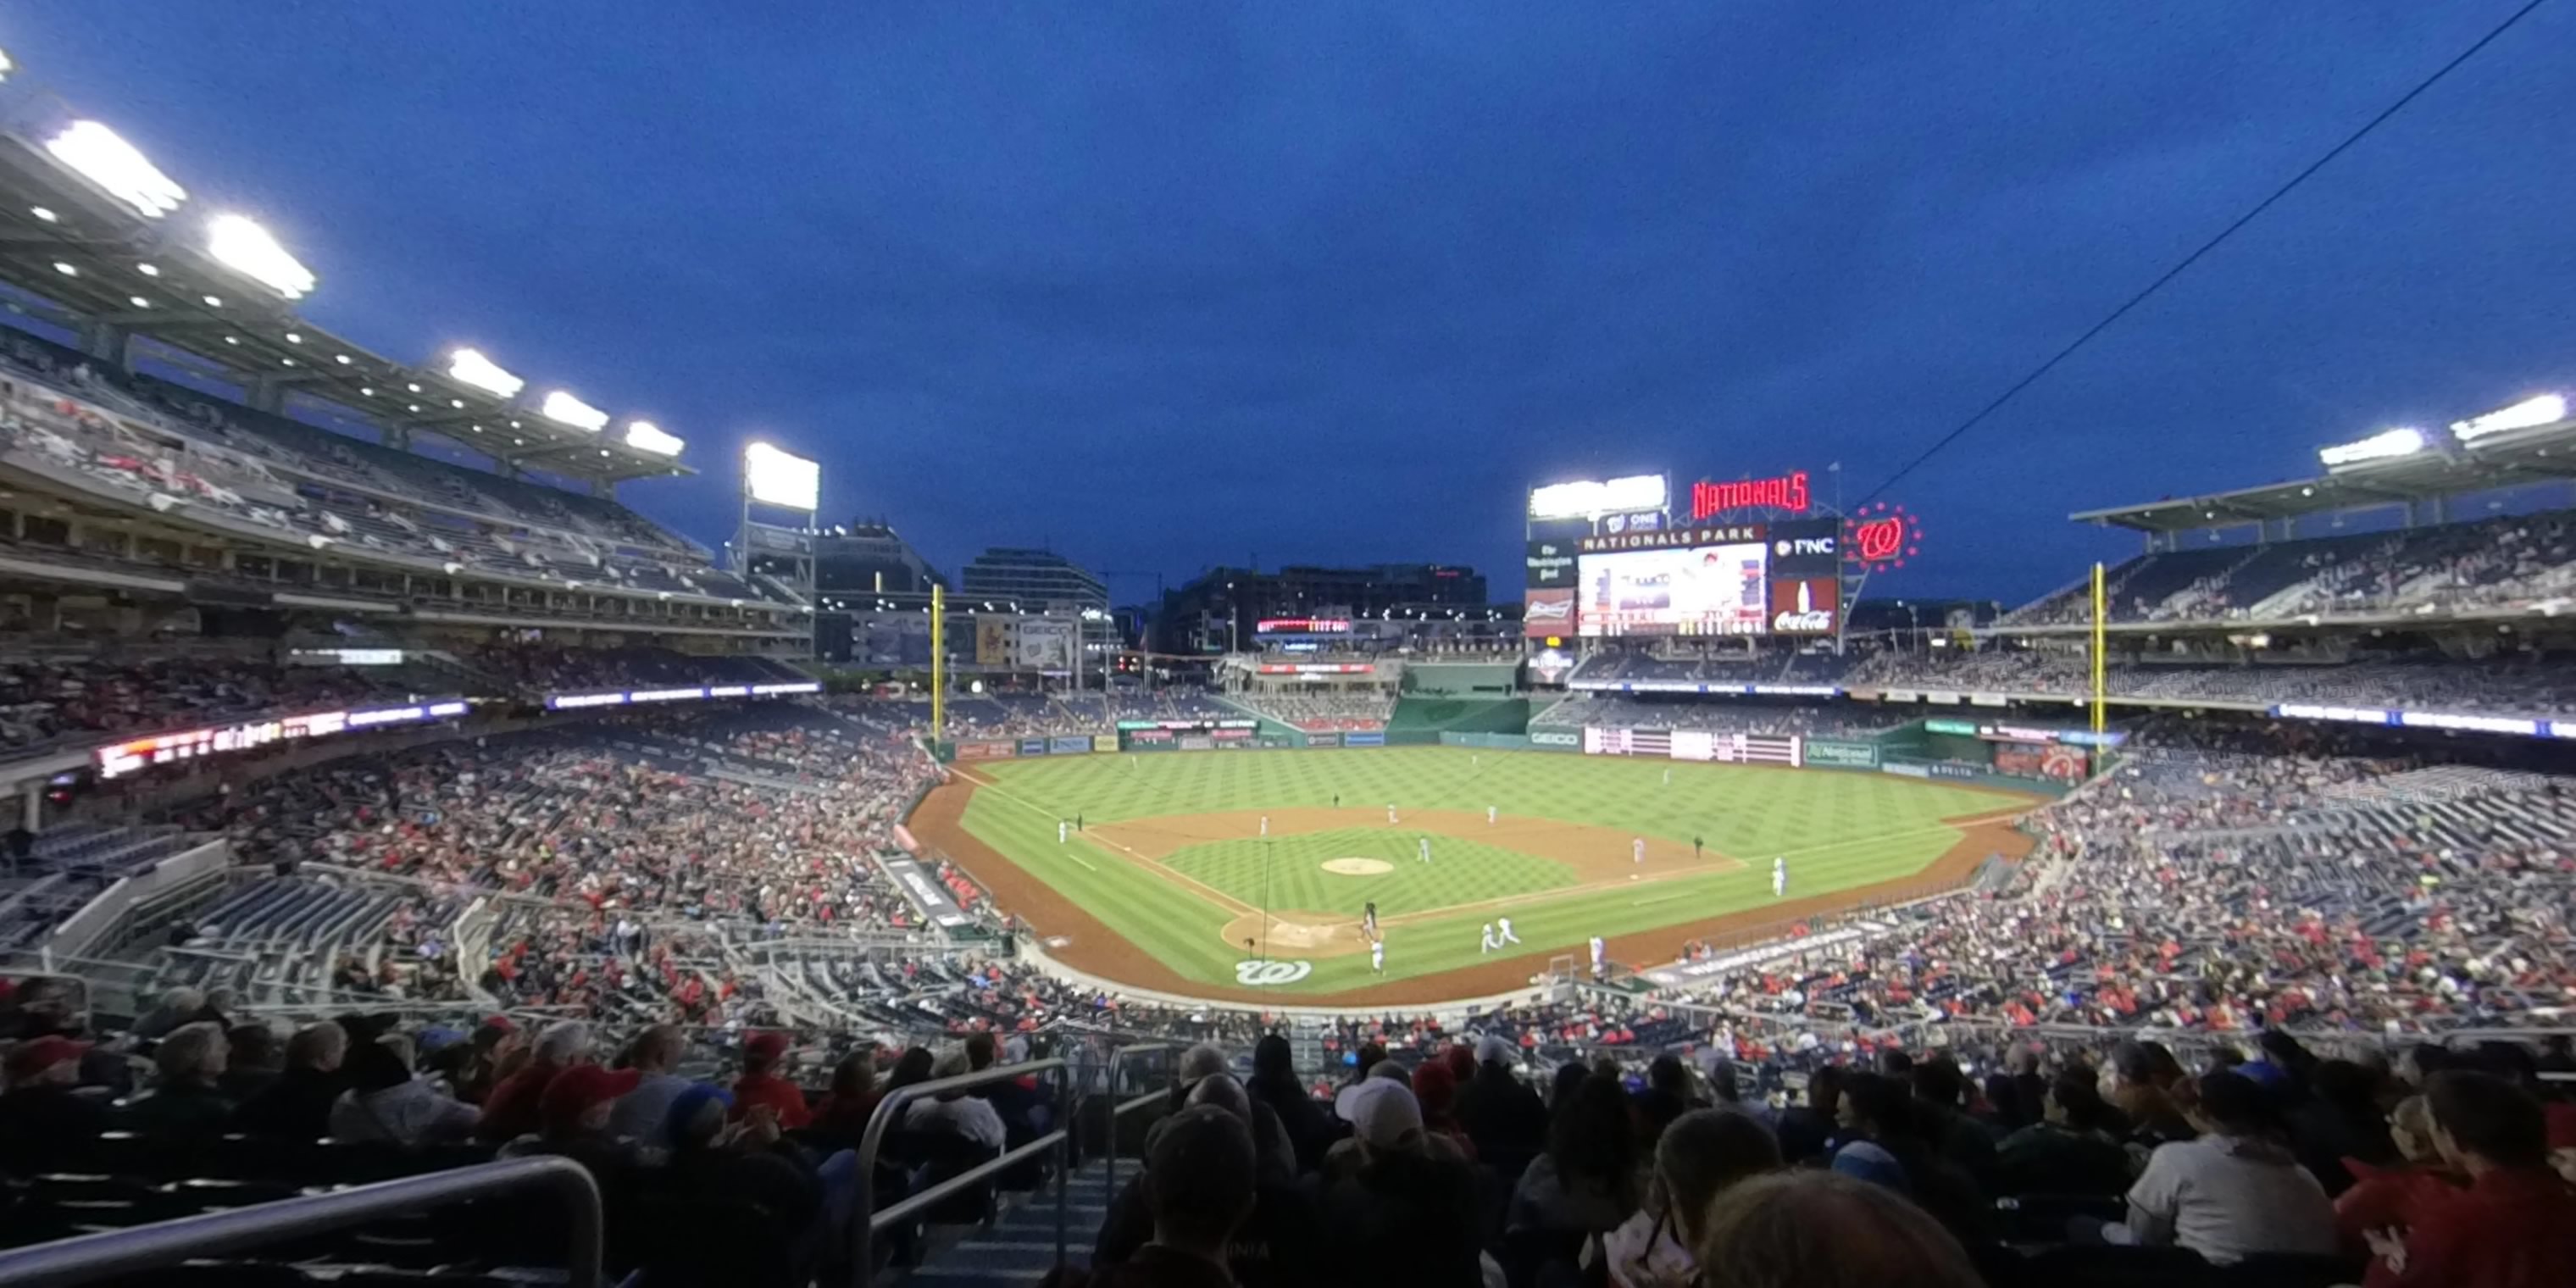 section 214 panoramic seat view  for baseball - nationals park